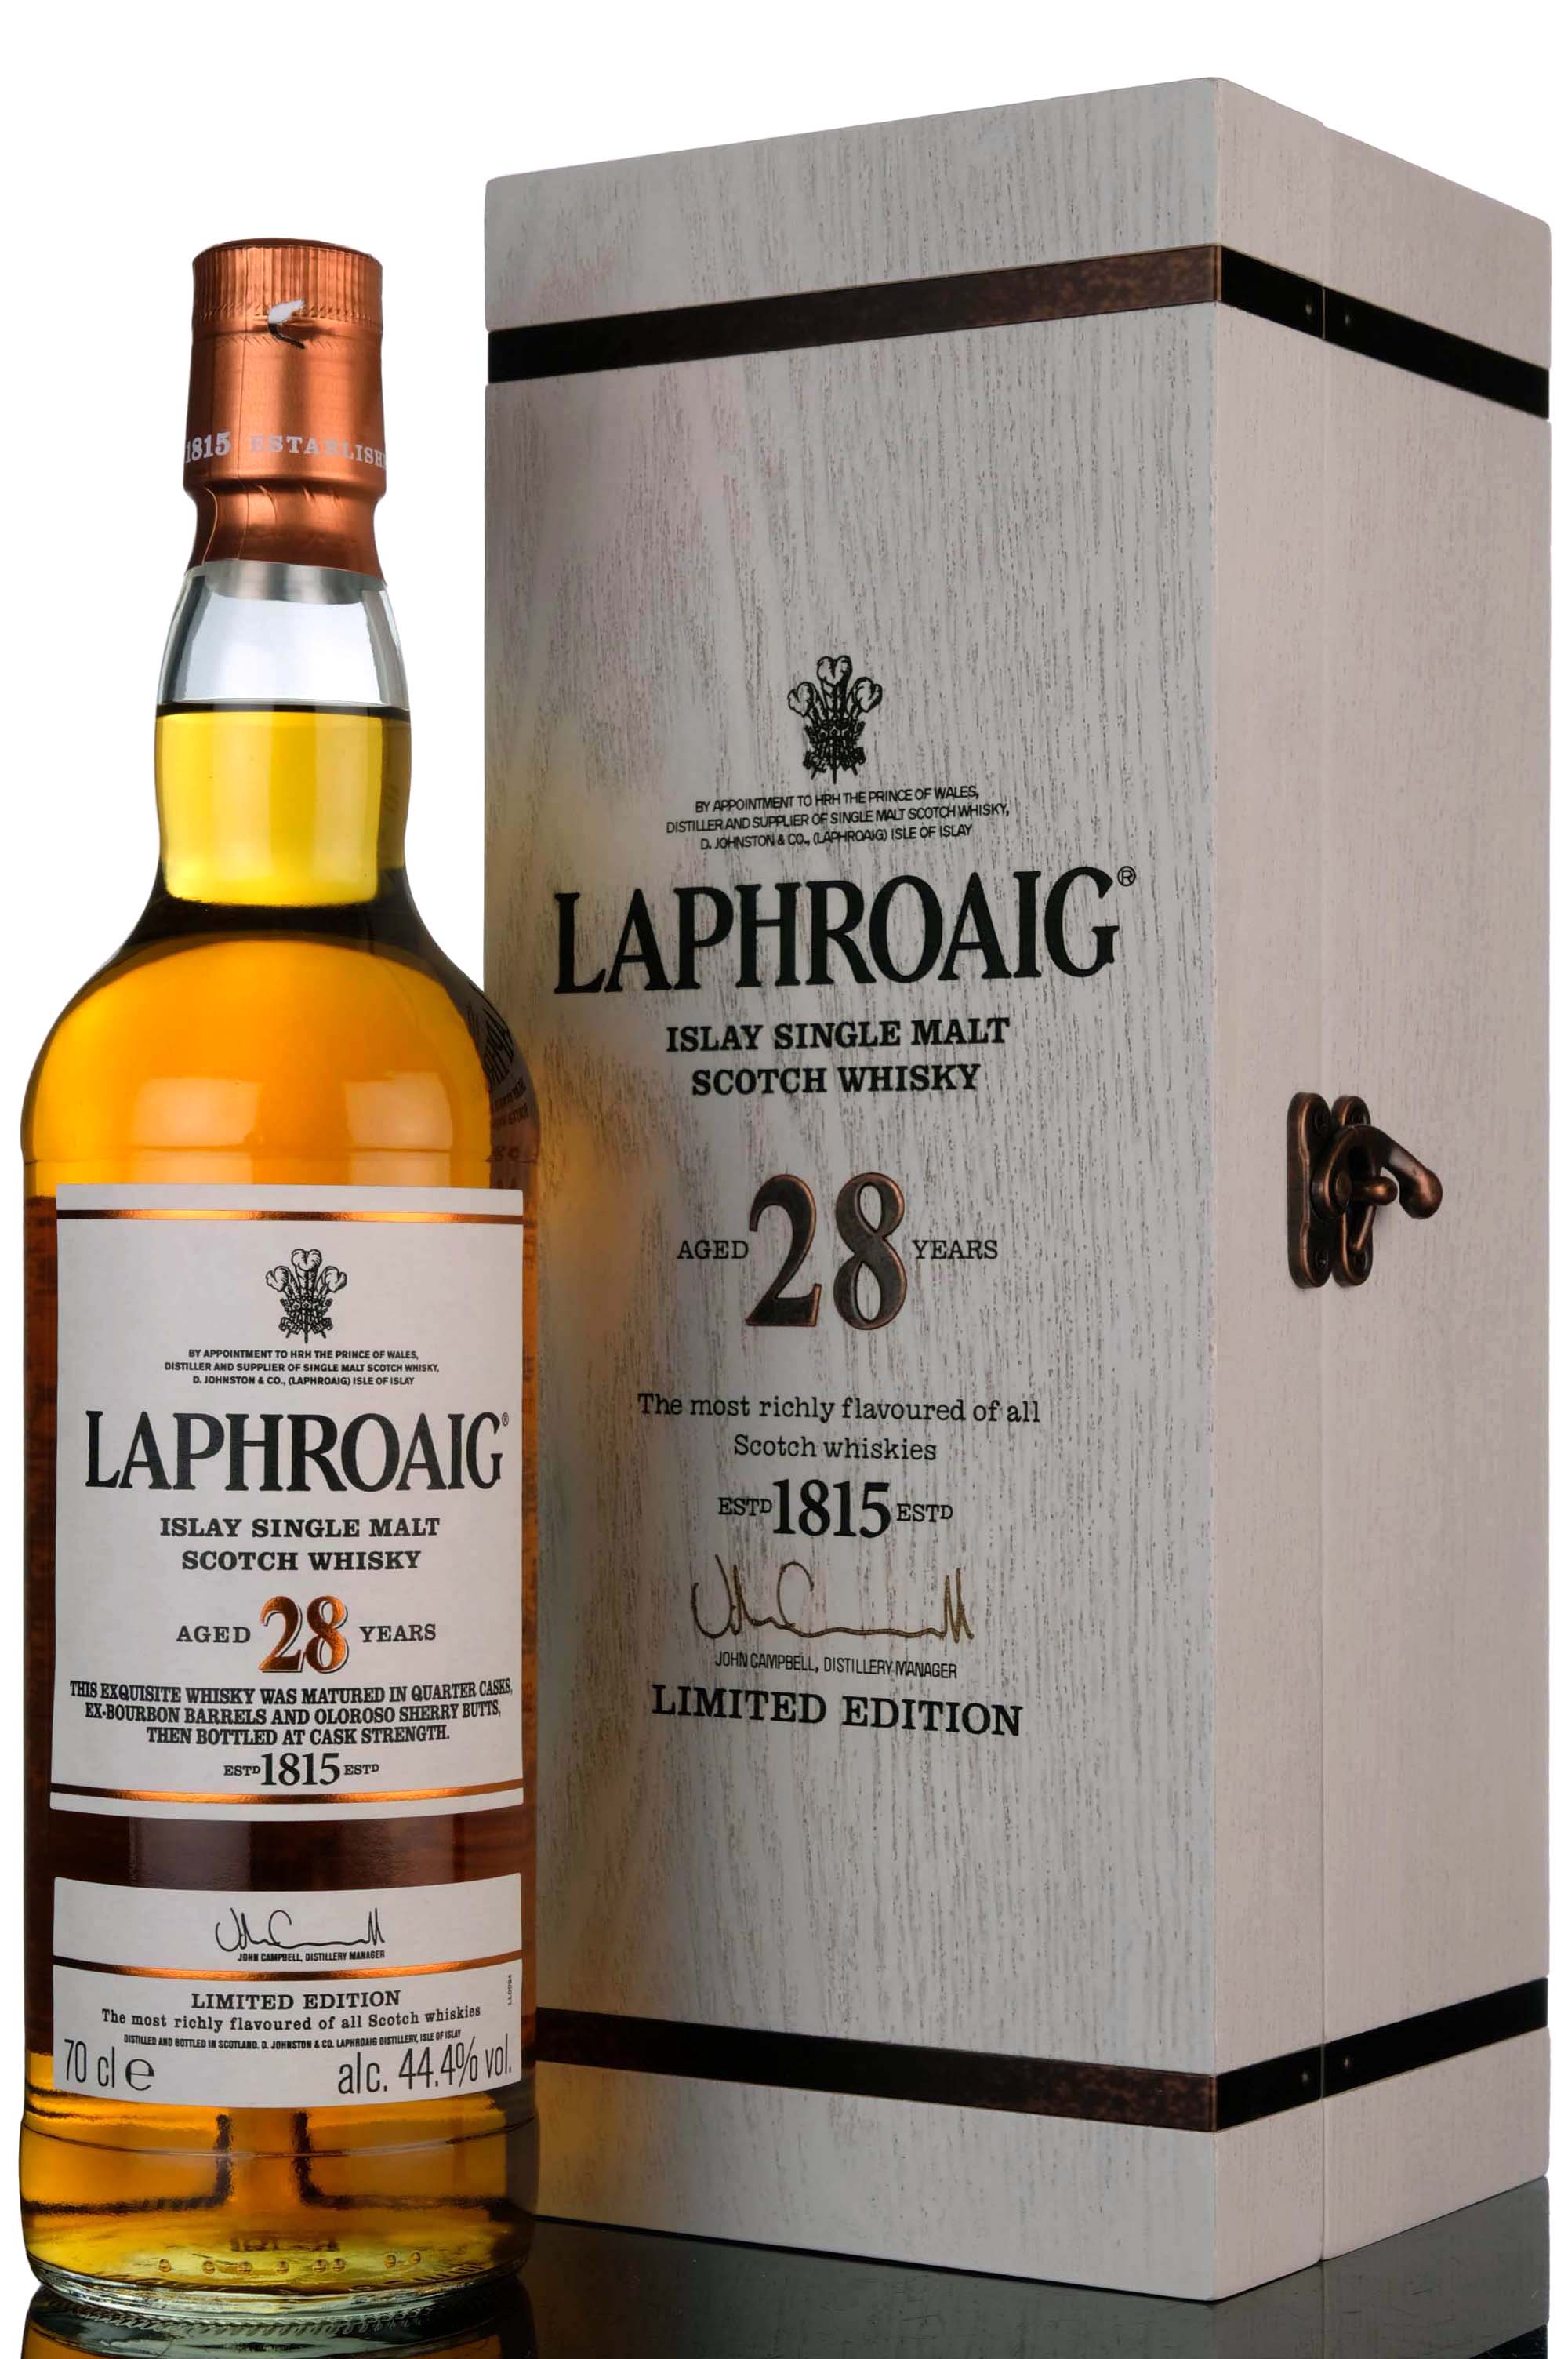 Laphroaig 28 Year Old - Limited Edition - 2018 Release